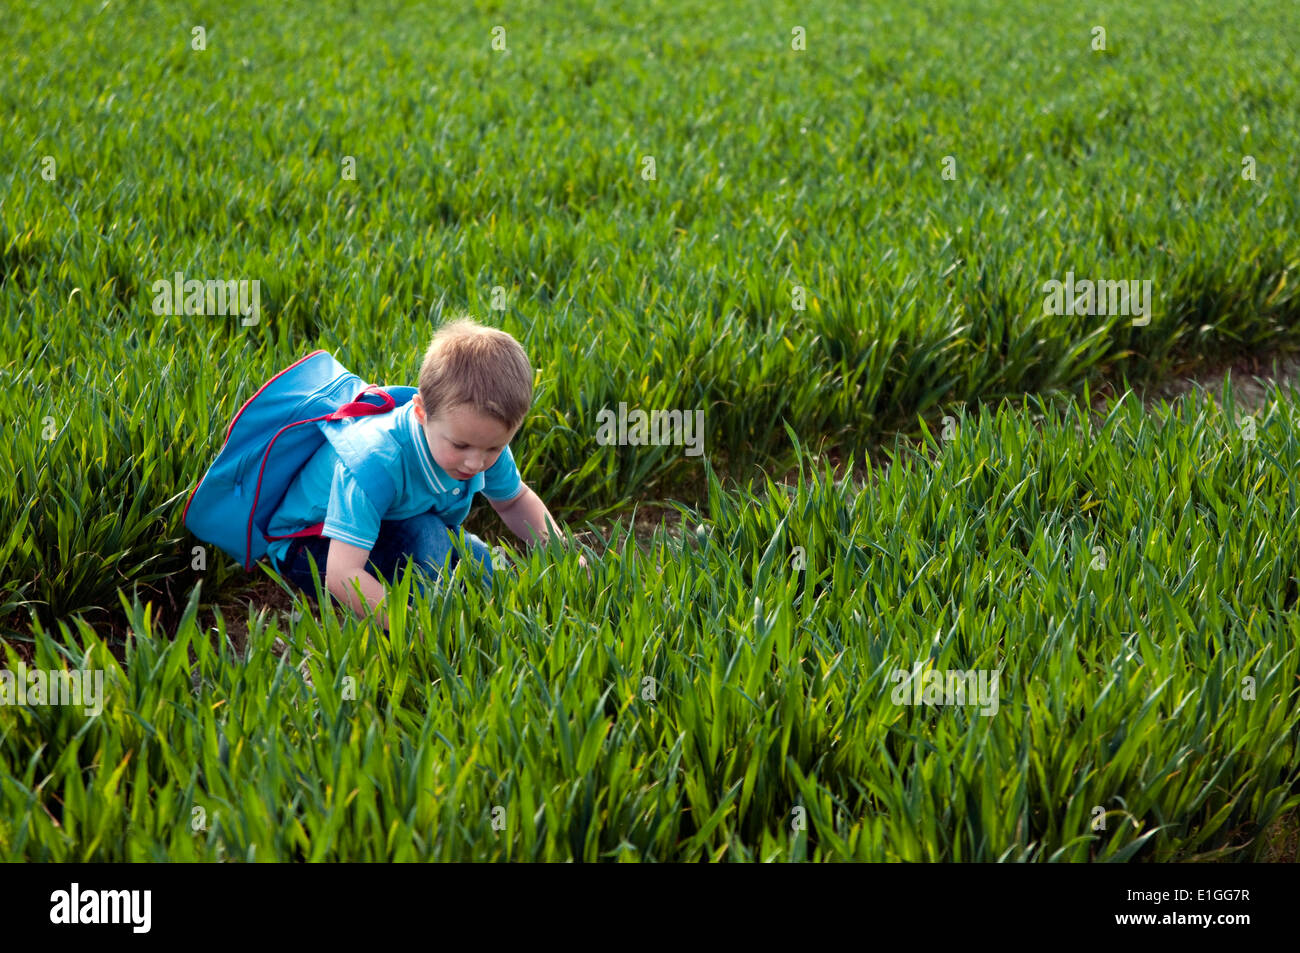 young boy bent down looking at the new crops growing in a field Stock Photo